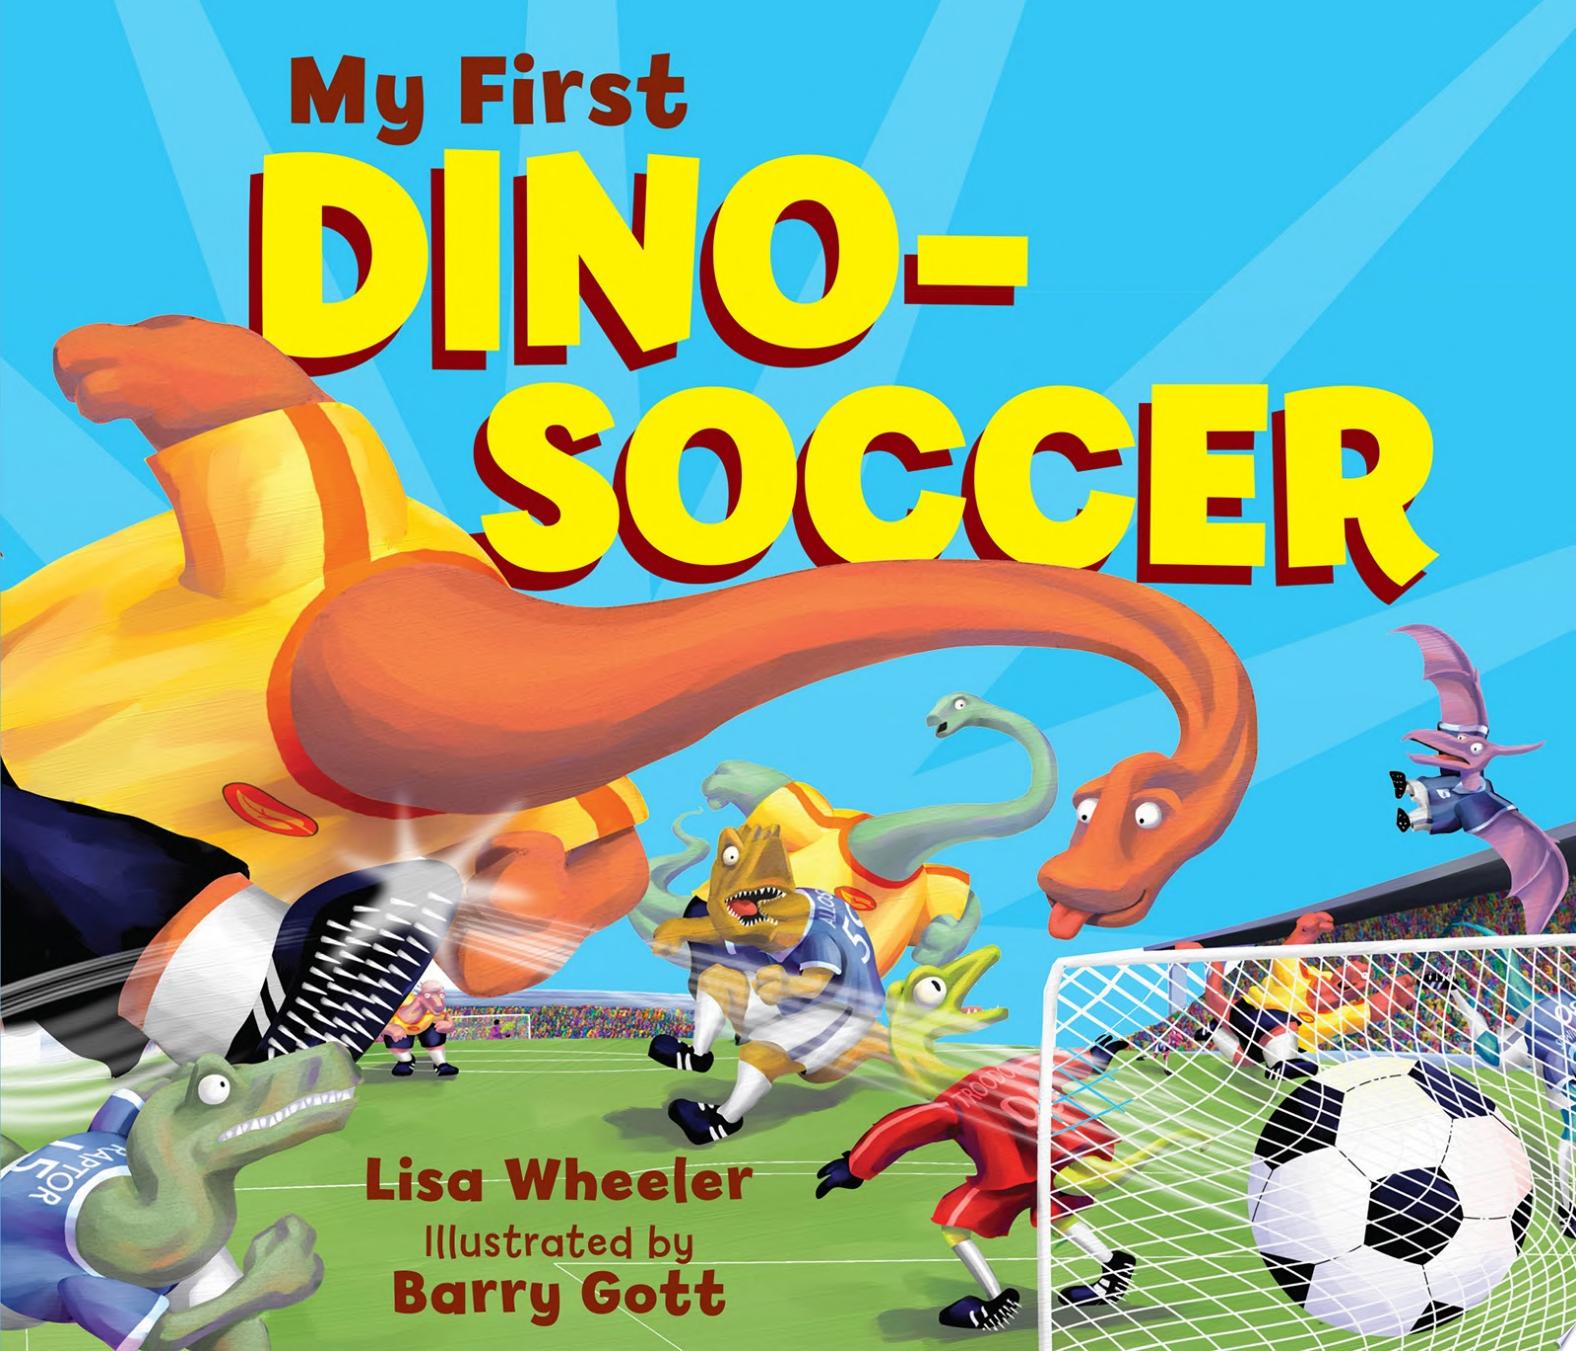 Image for "My First Dino-Soccer"